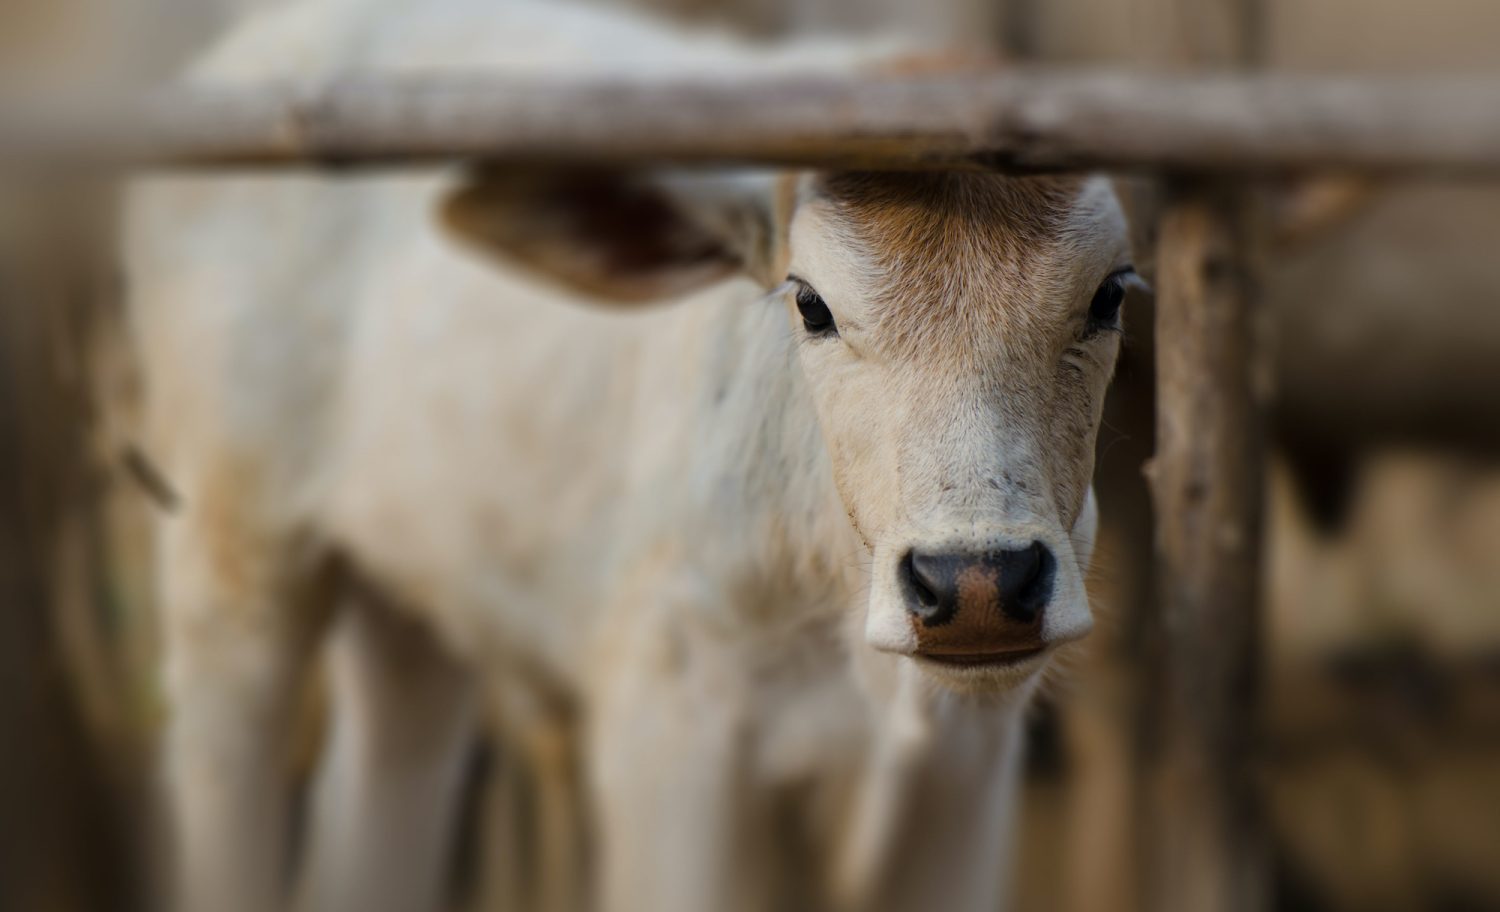 Understanding the issues: painful procedures for cattle | Animals Australia